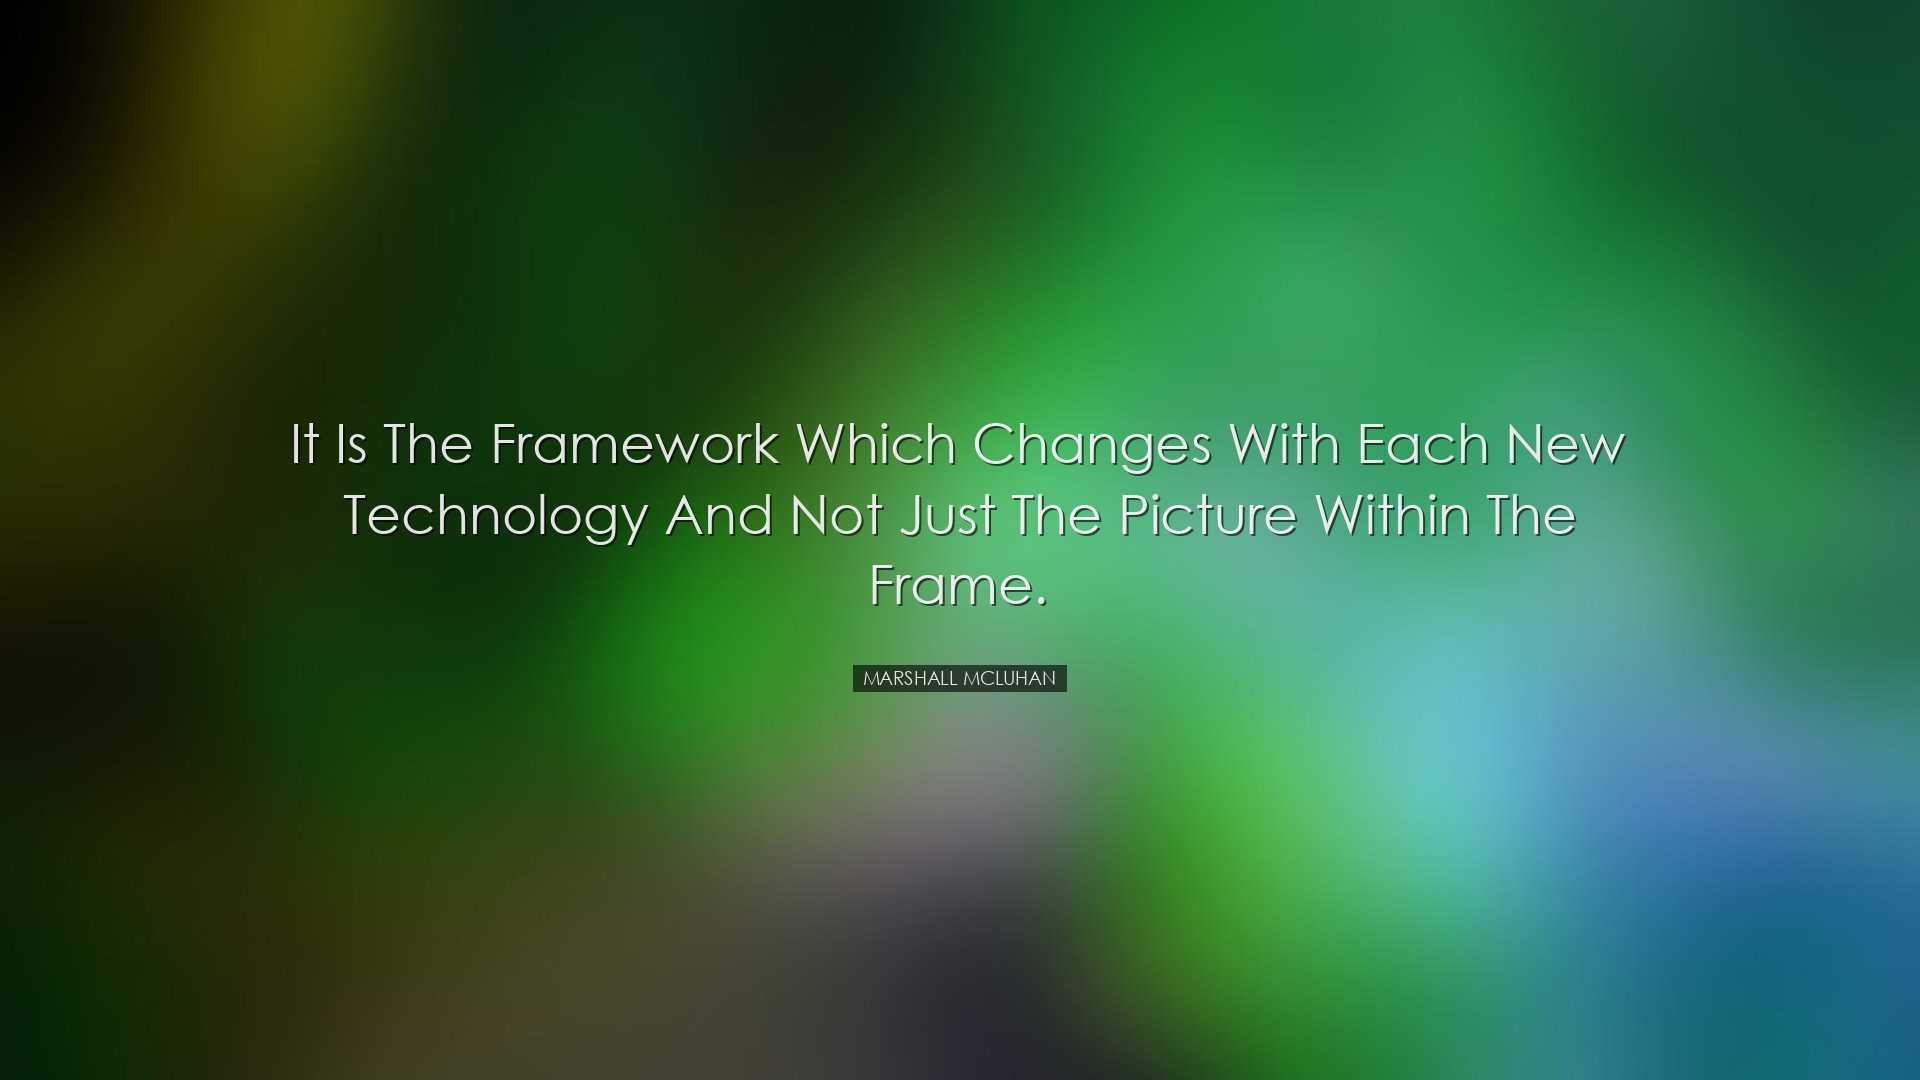 It is the framework which changes with each new technology and not